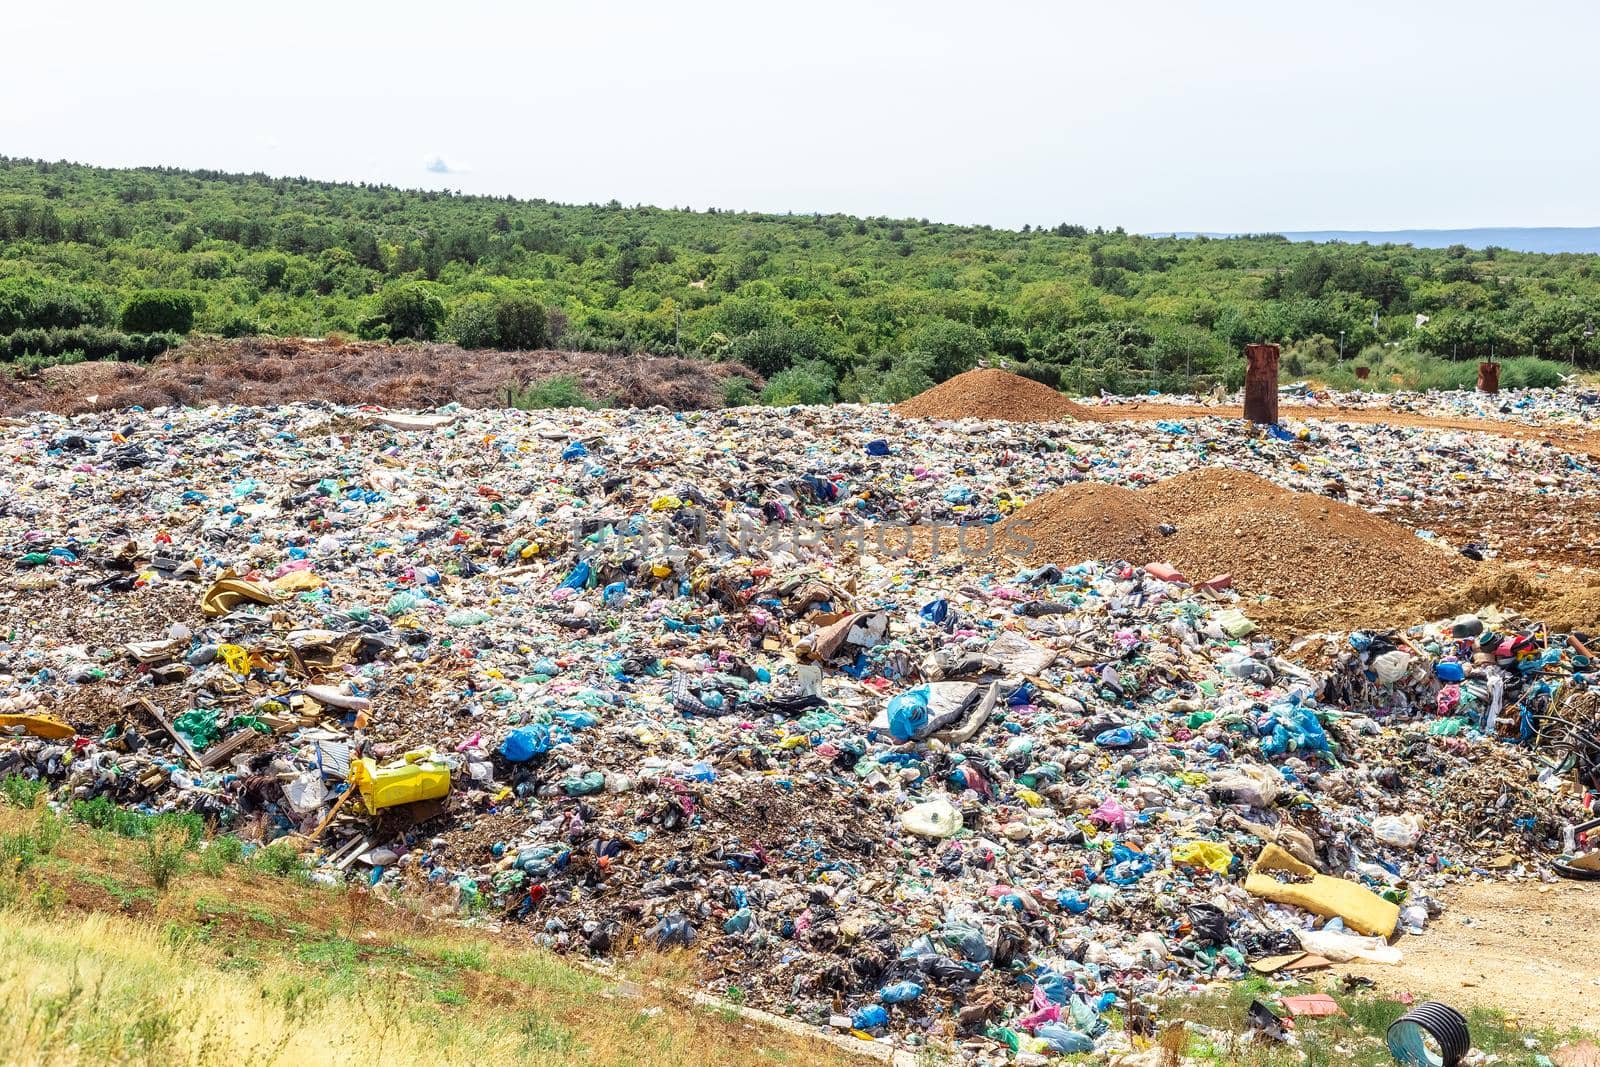 Pile of non-recyclable waste on landfill site by Syvanych